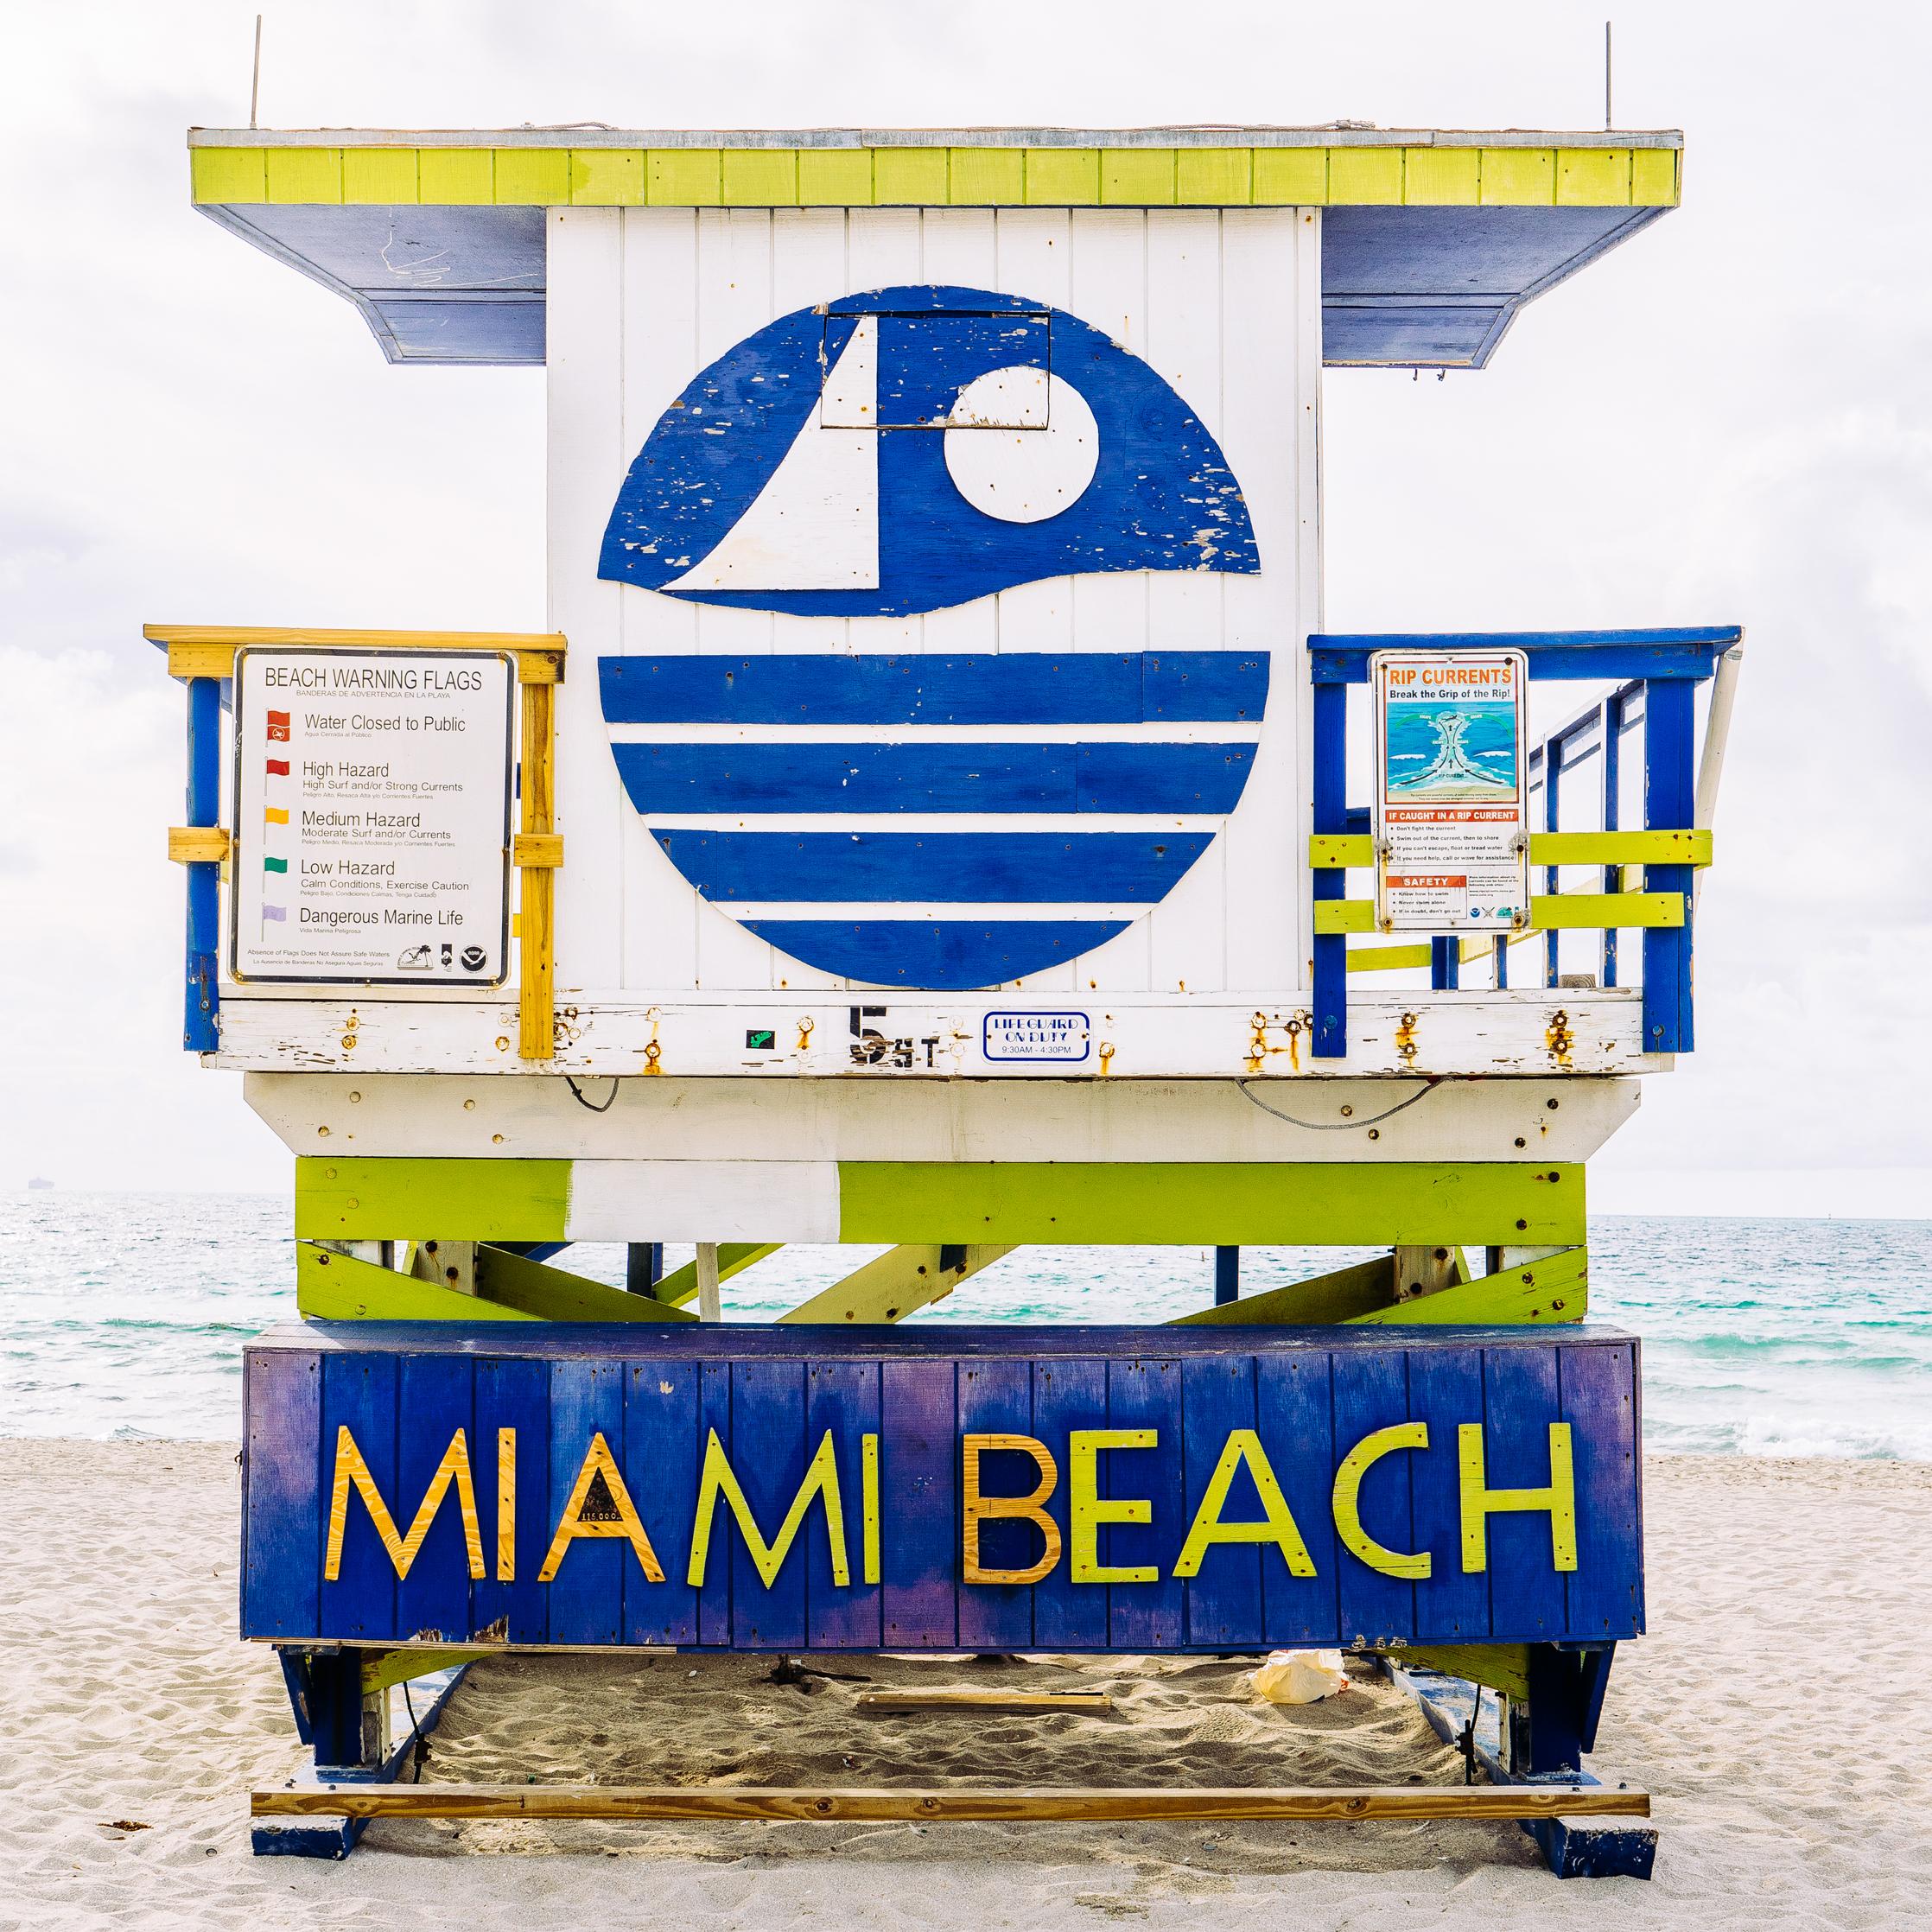 Peter Mendelson Color Photograph - "Miami Beach Lifeguard Stand - Rr View, " Contemporary Photograph, 40" x 40"